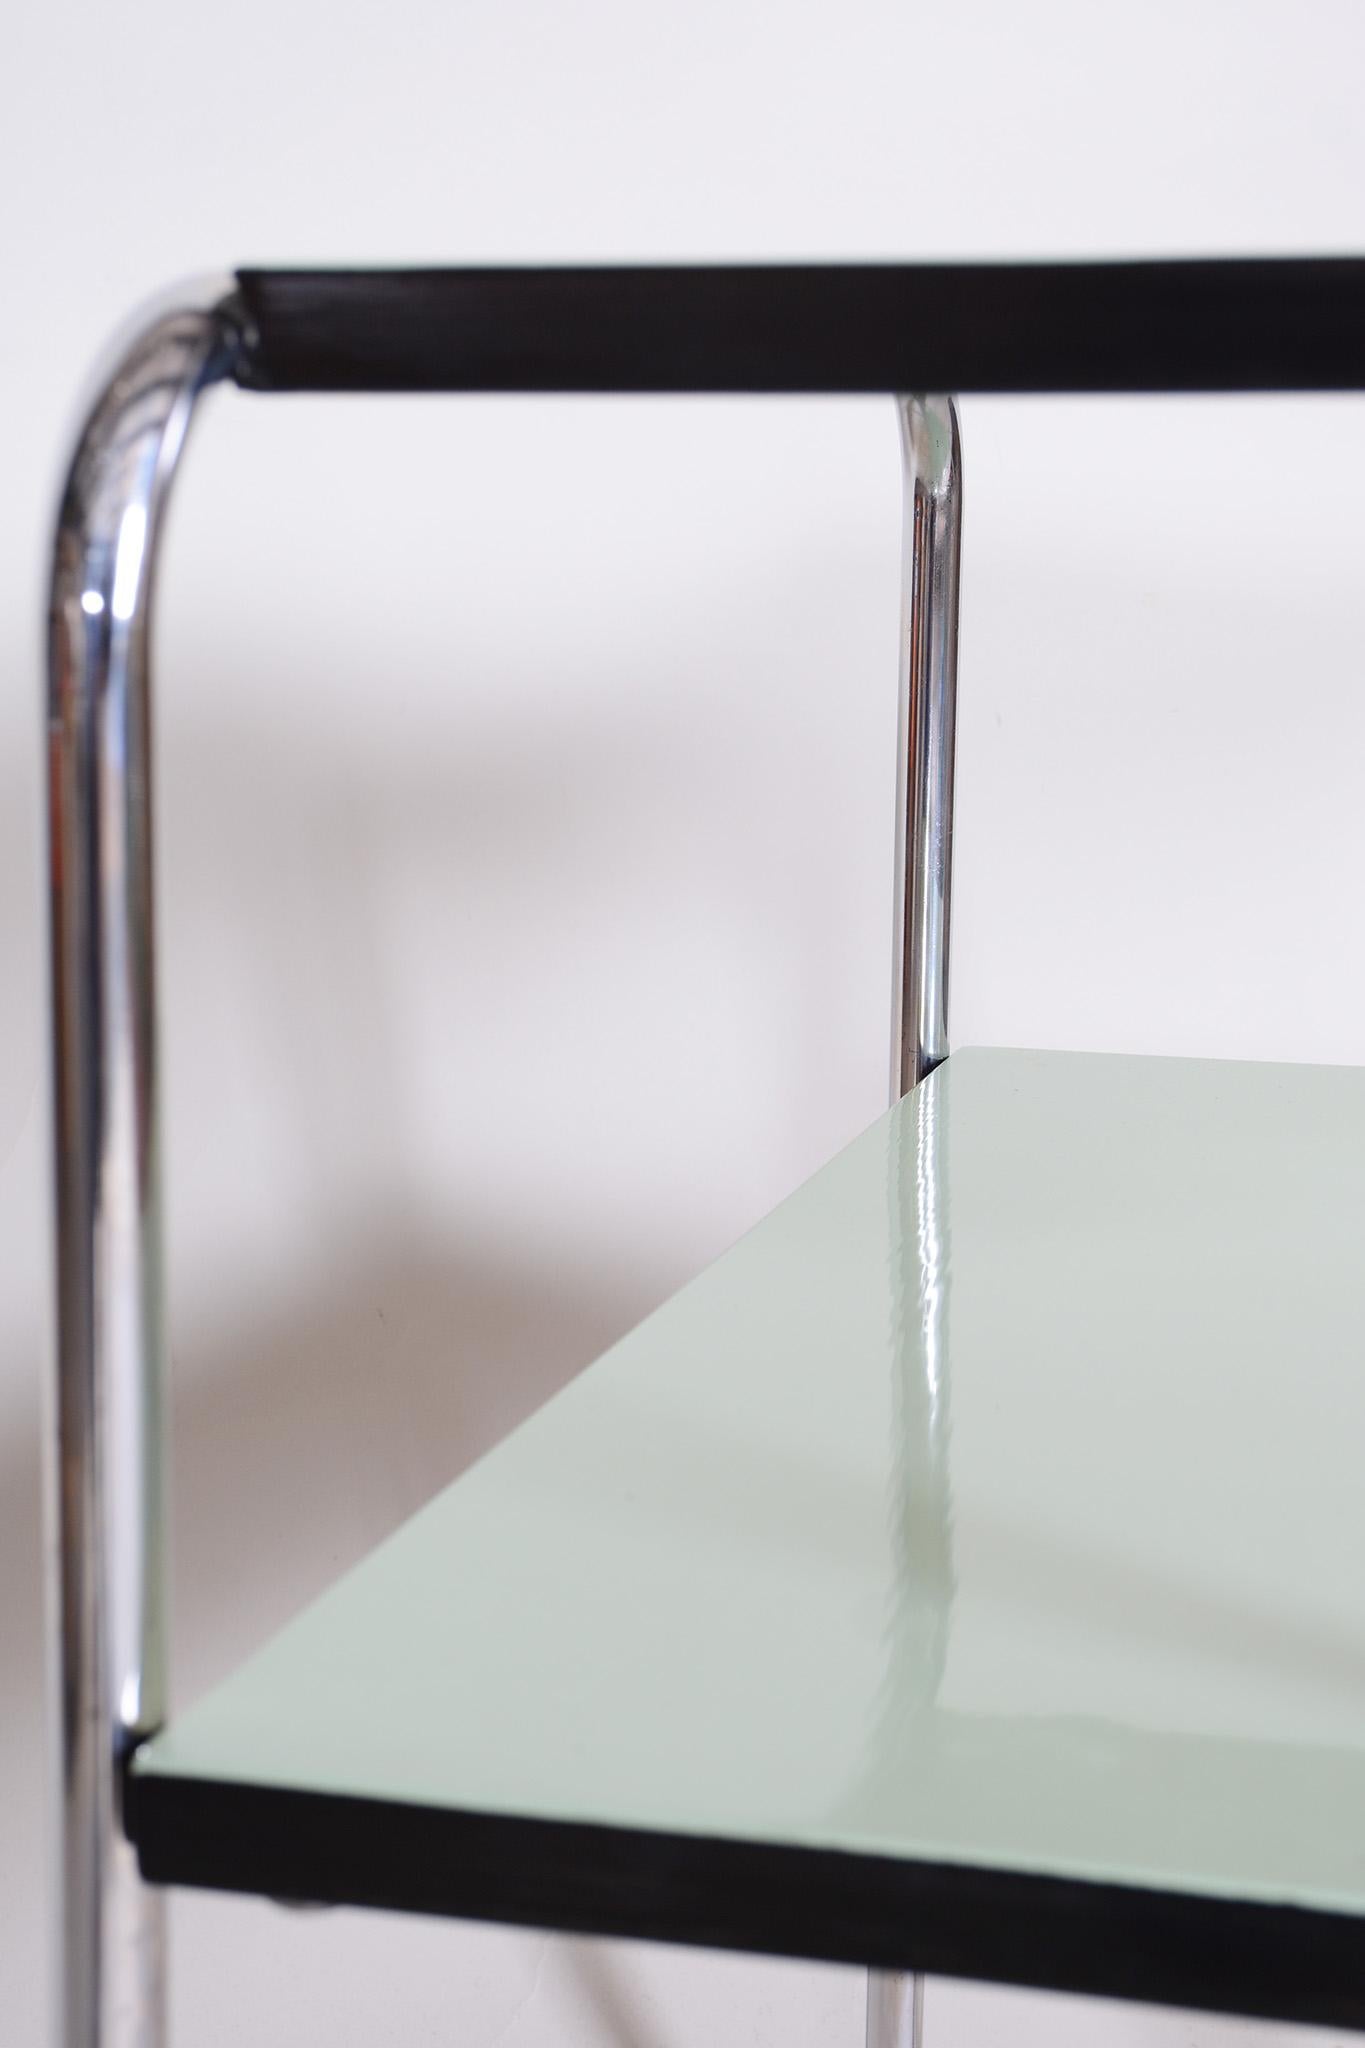 Mid-20th Century Restored Art Deco Side Table, Marcel Breuer, Thonet Chrome Steel, Germany, 1930s For Sale